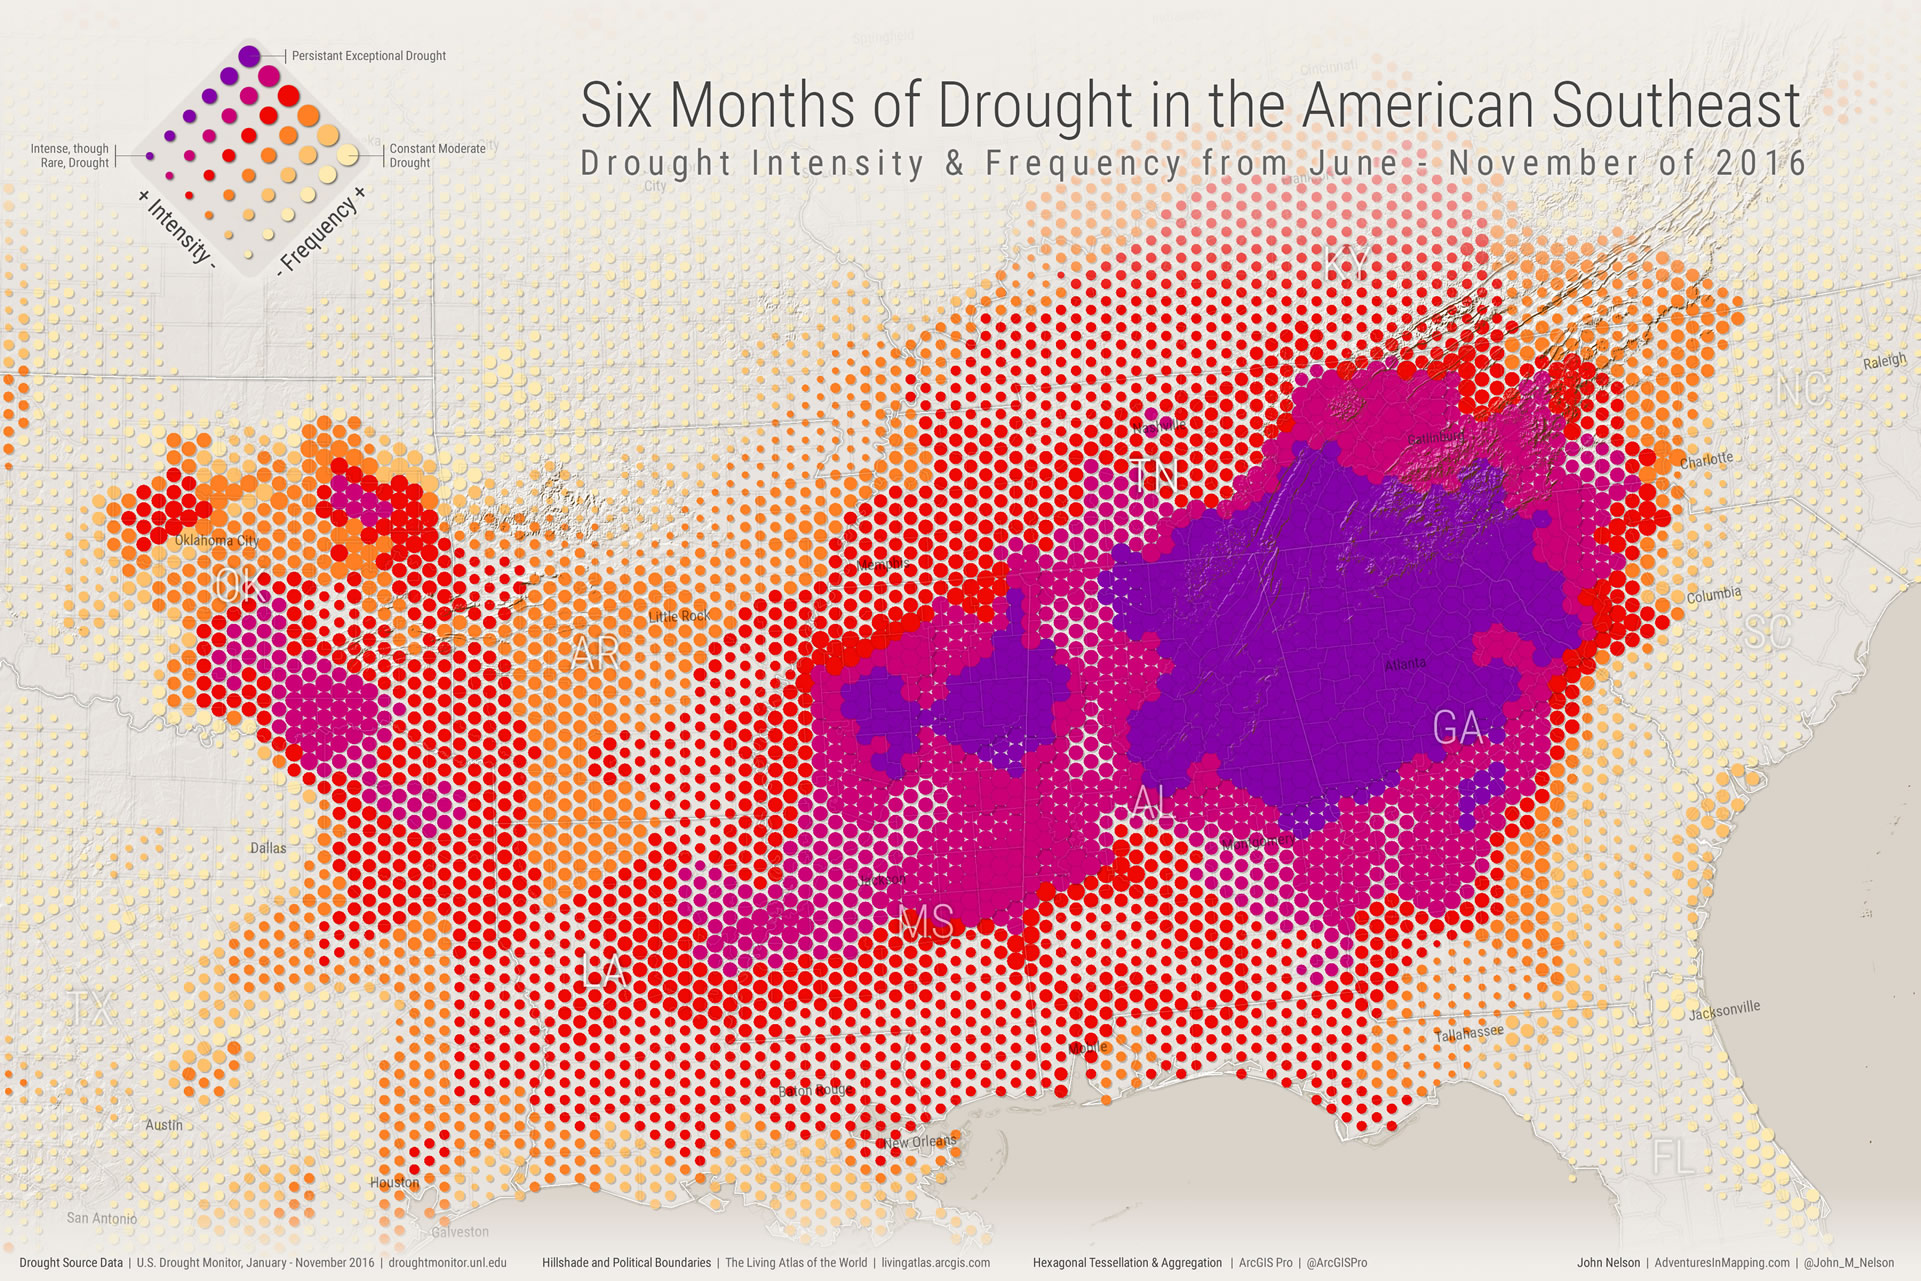 Six months of drought in the American Southeast